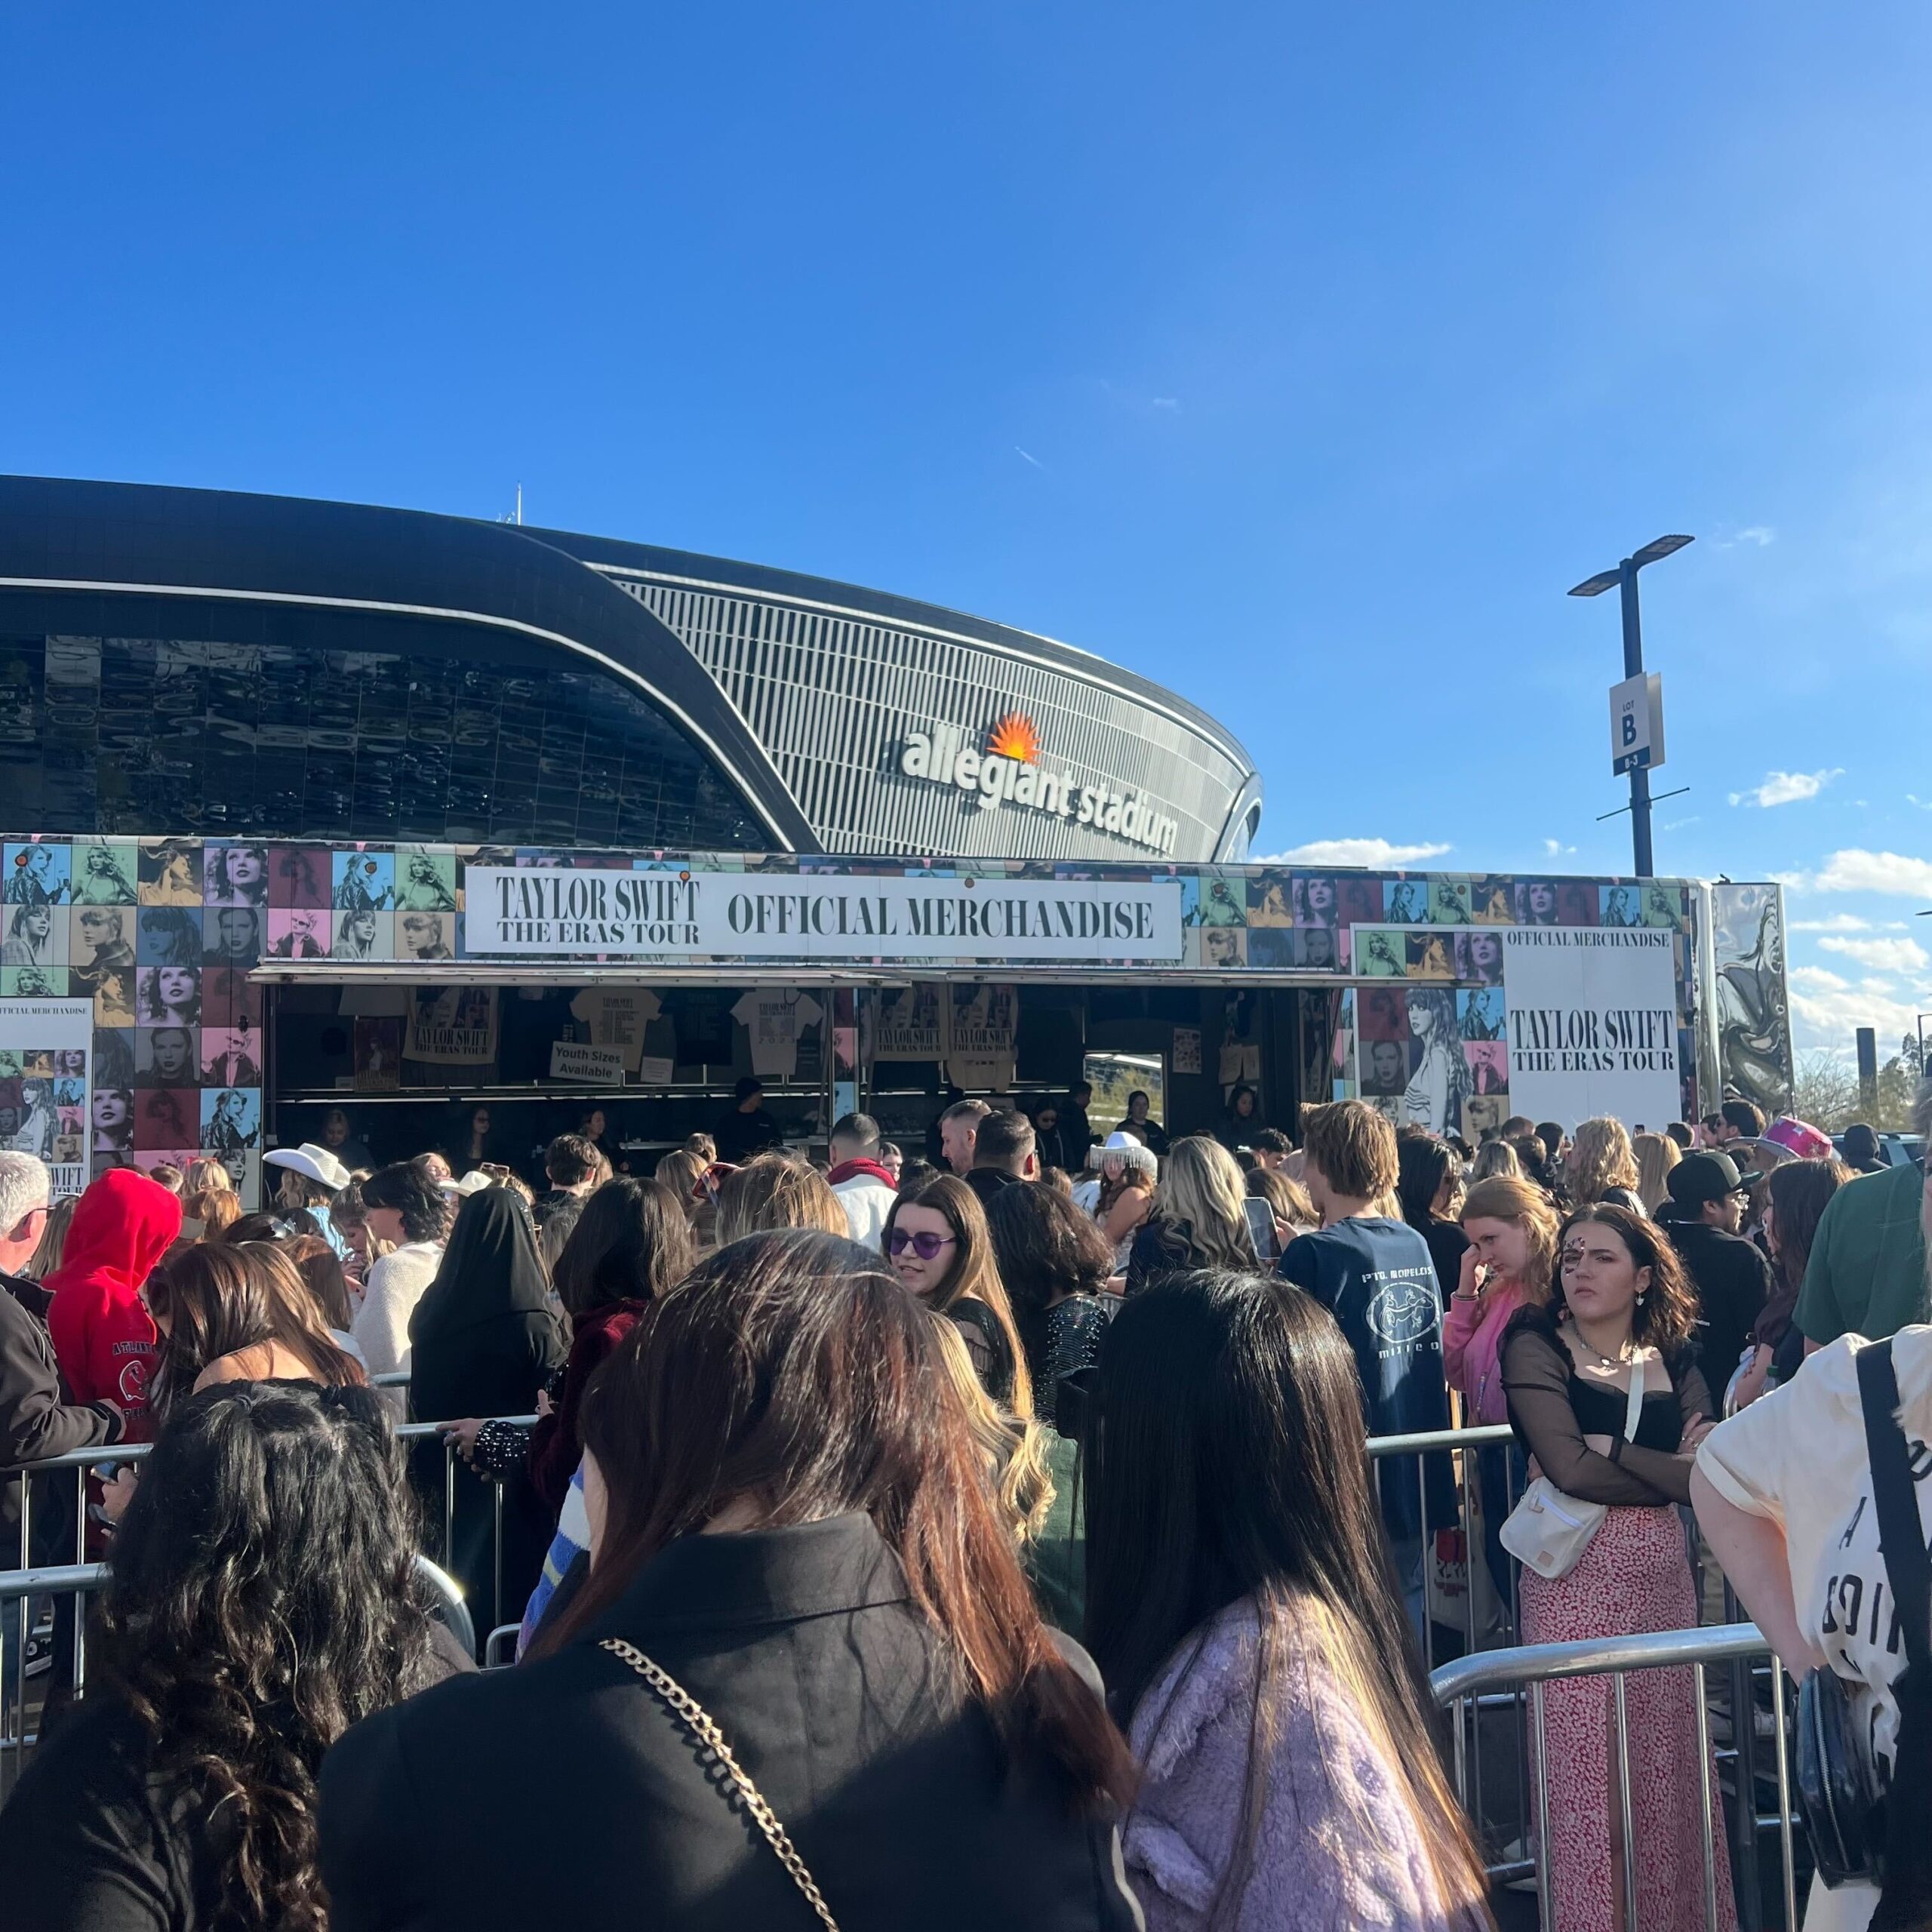 SoFi Stadium's Taylor Swift merch sale brings out the masses – a day before  the shows even begin – Daily News